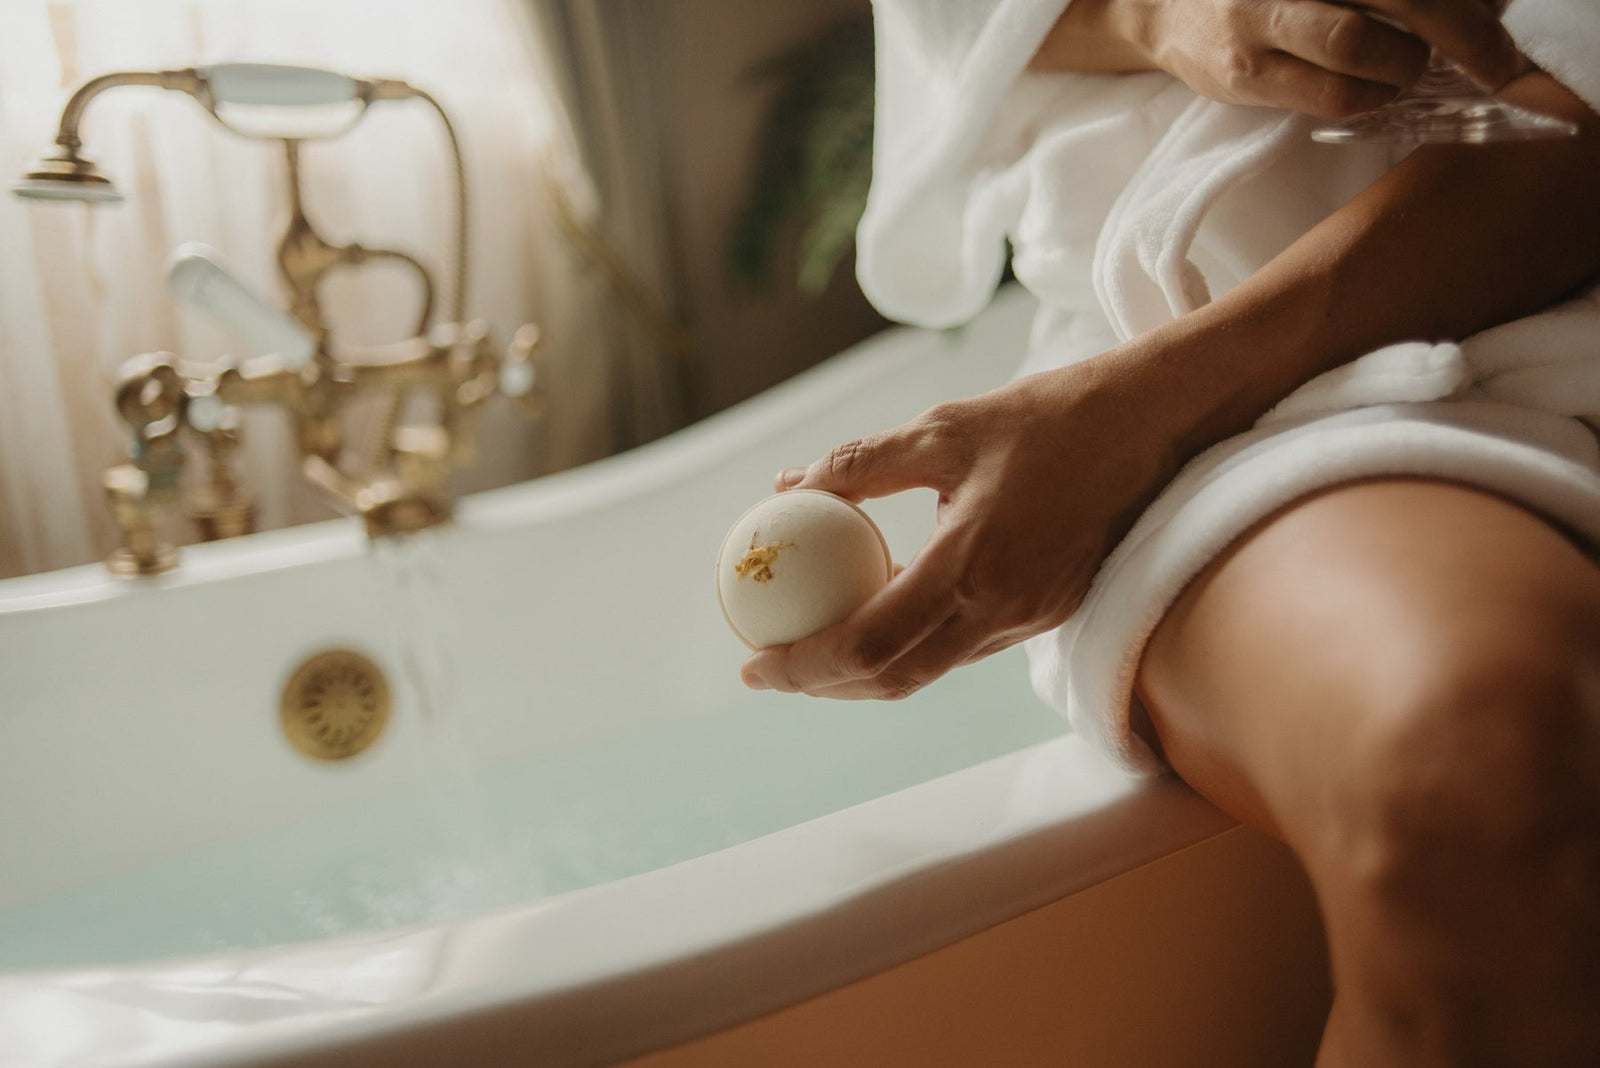 CBD Bath Bomb Uses: Chronic Pain, Stress Relief, and Athlete Recovery - Life Elements